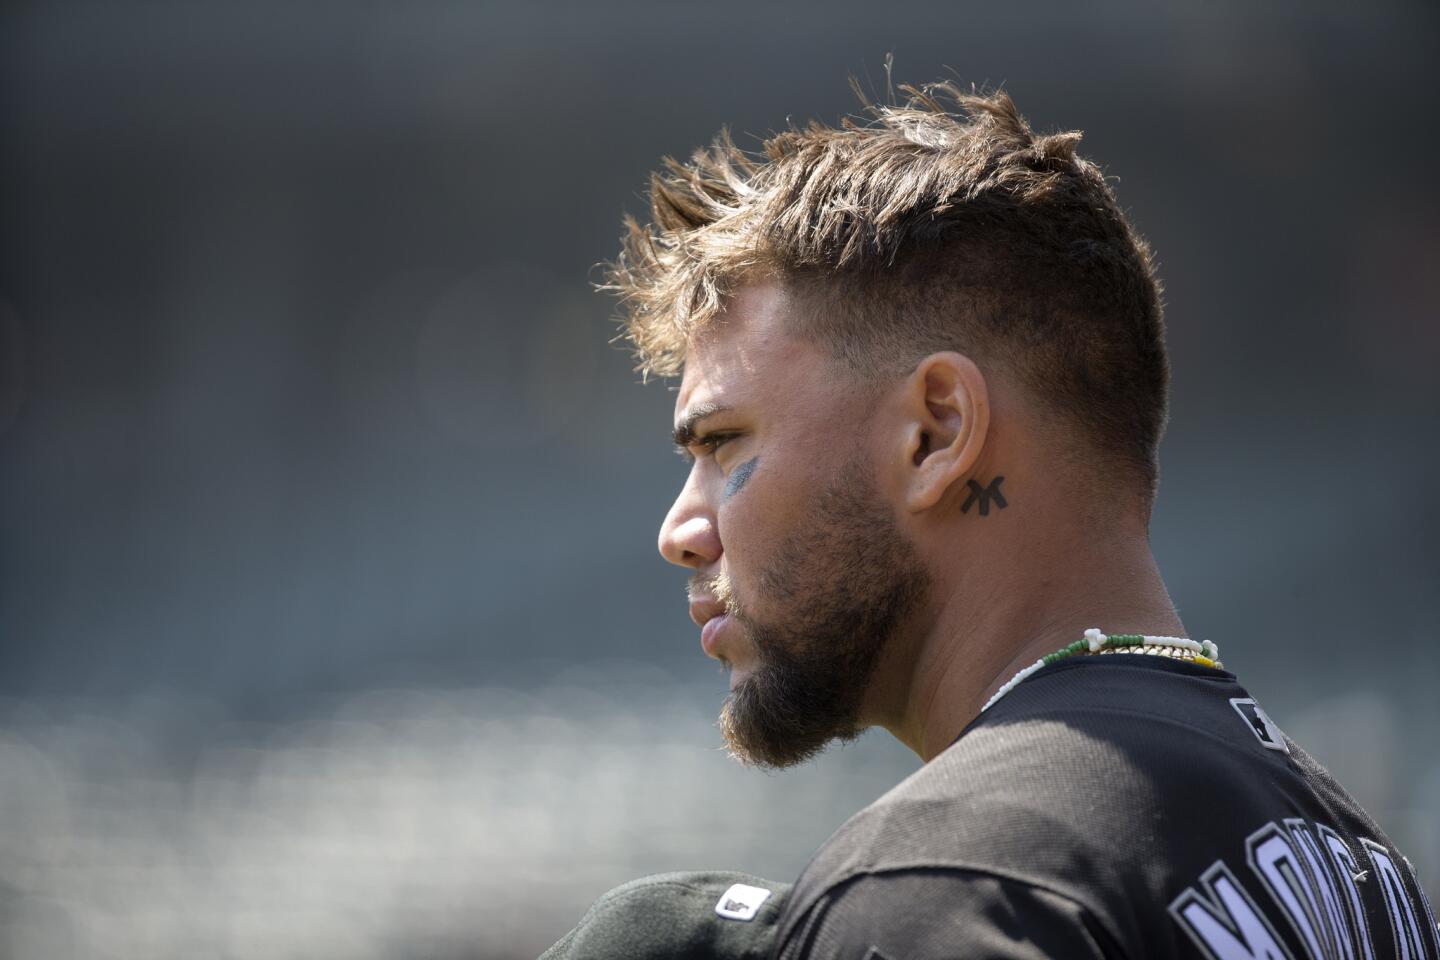 Yoan Moncada (10) stands for the National Anthem before the Chicago White Sox versus Tampa Bay Rays game Wednesday, April 11, 2018, at Guaranteed Rate Field in Chicago.